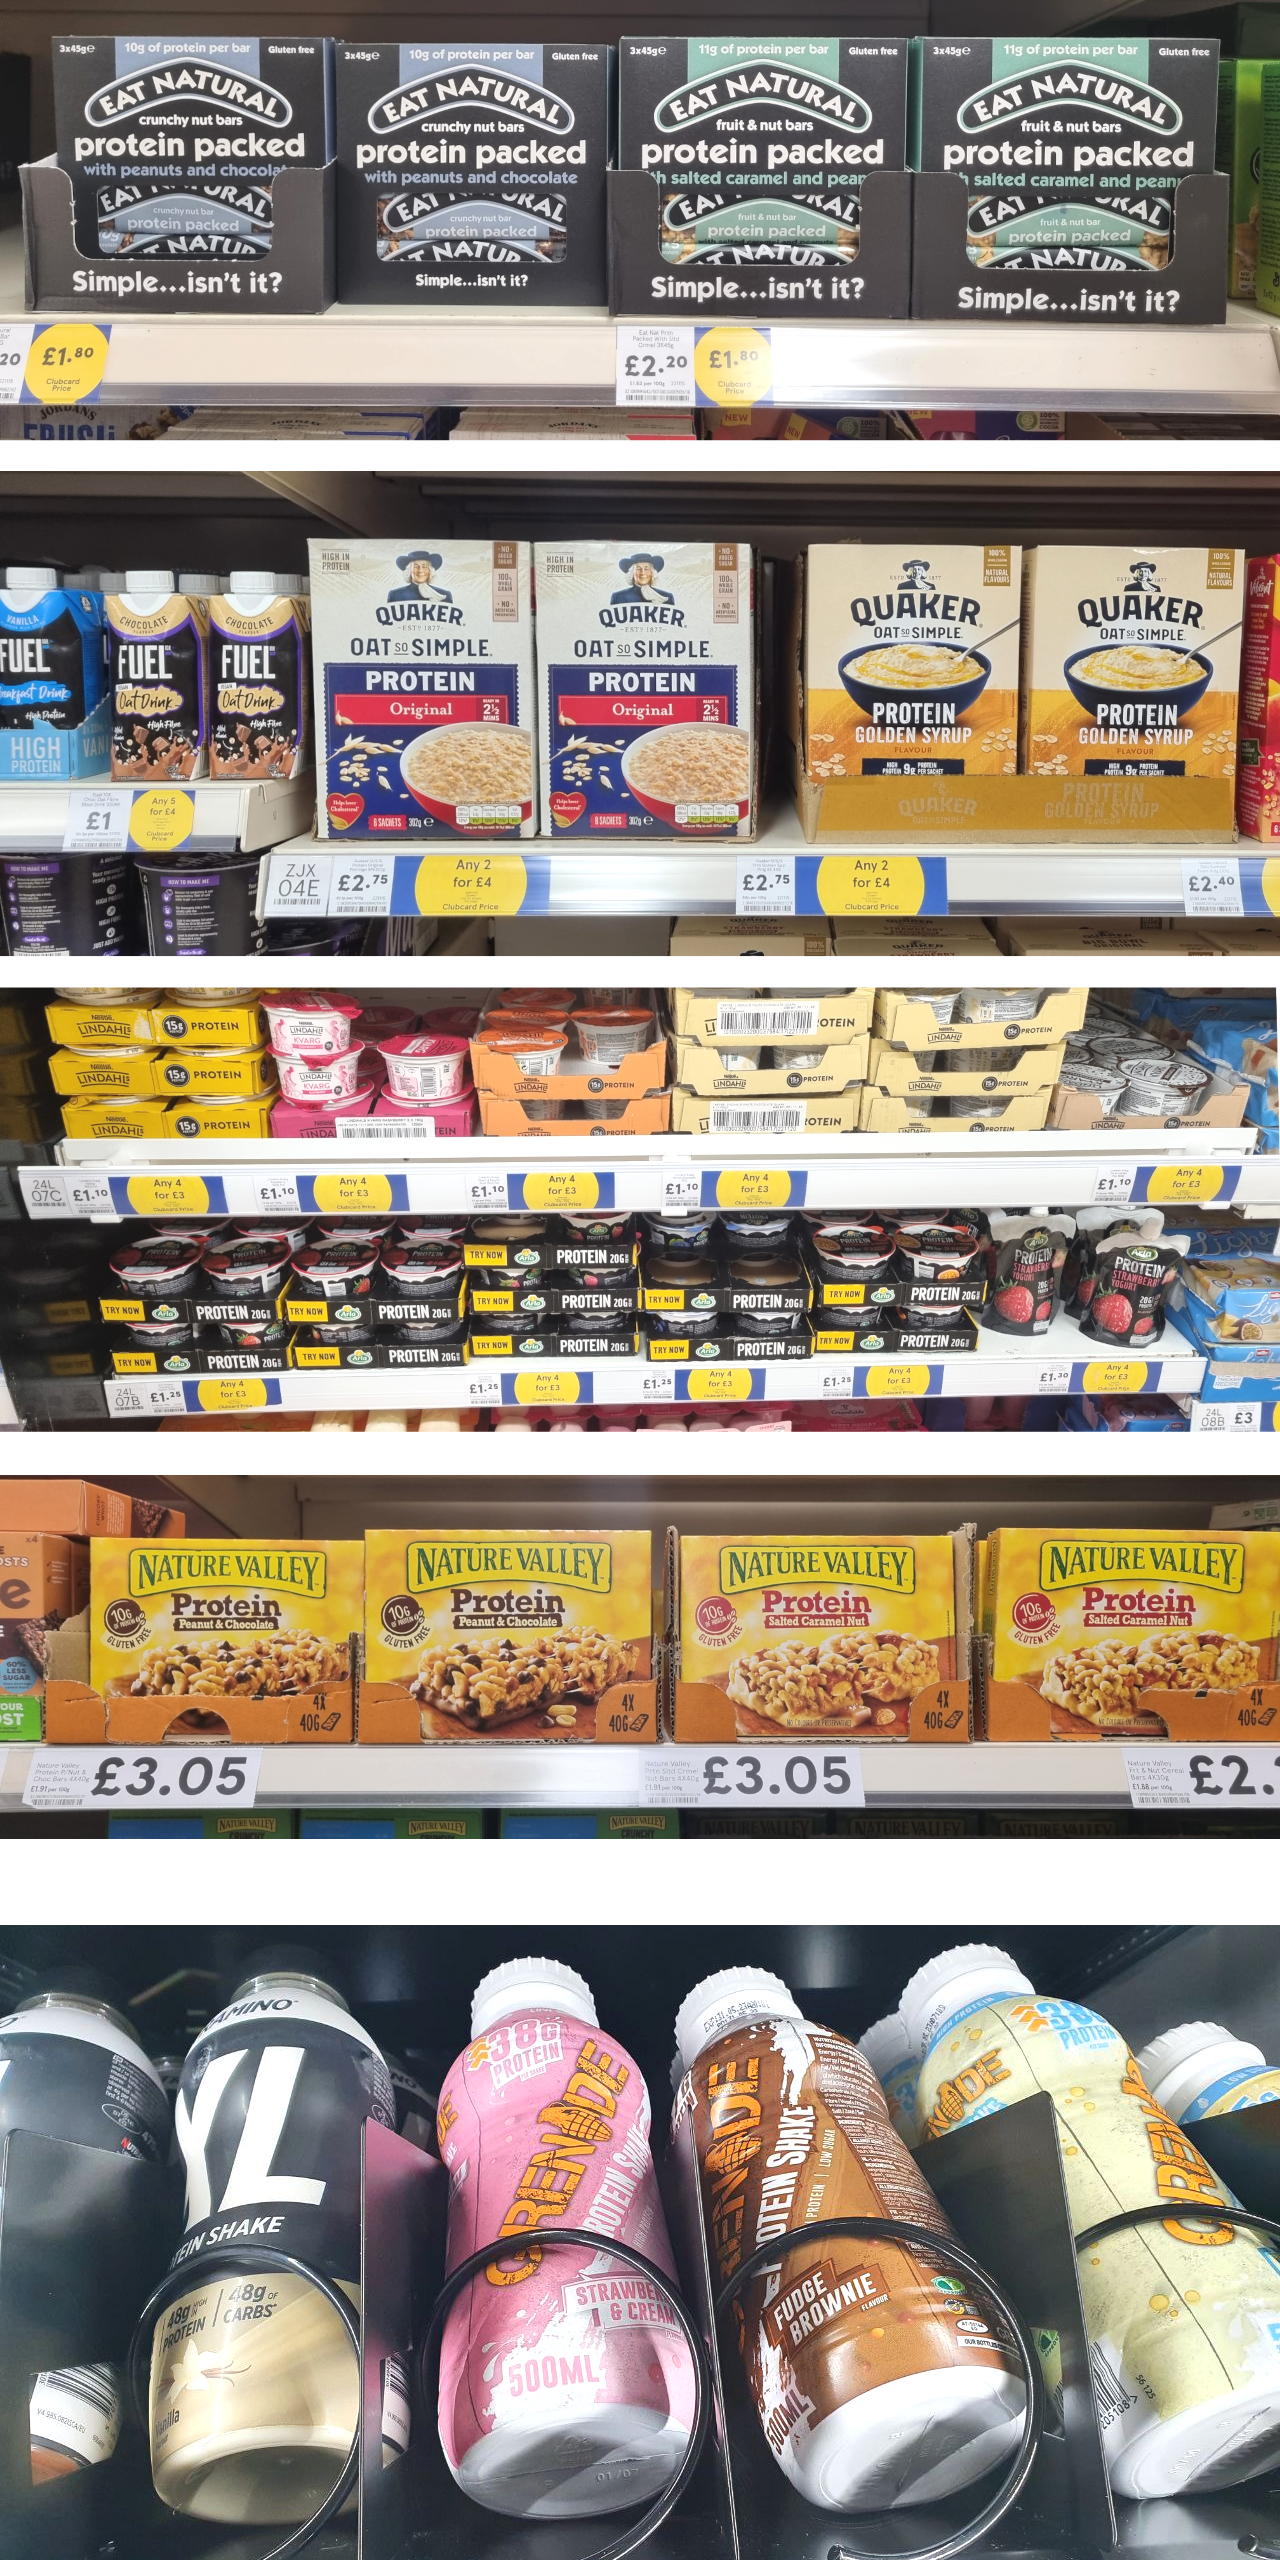 Array of images of foods on shop shelves advertised by protein content: Eat Natural bars, FUEL oat drink, Quaker Oats porridge mix, a variety of yogurts, Nature Valley granola bars, Grenade and other brands of milkshake in a vending machine.